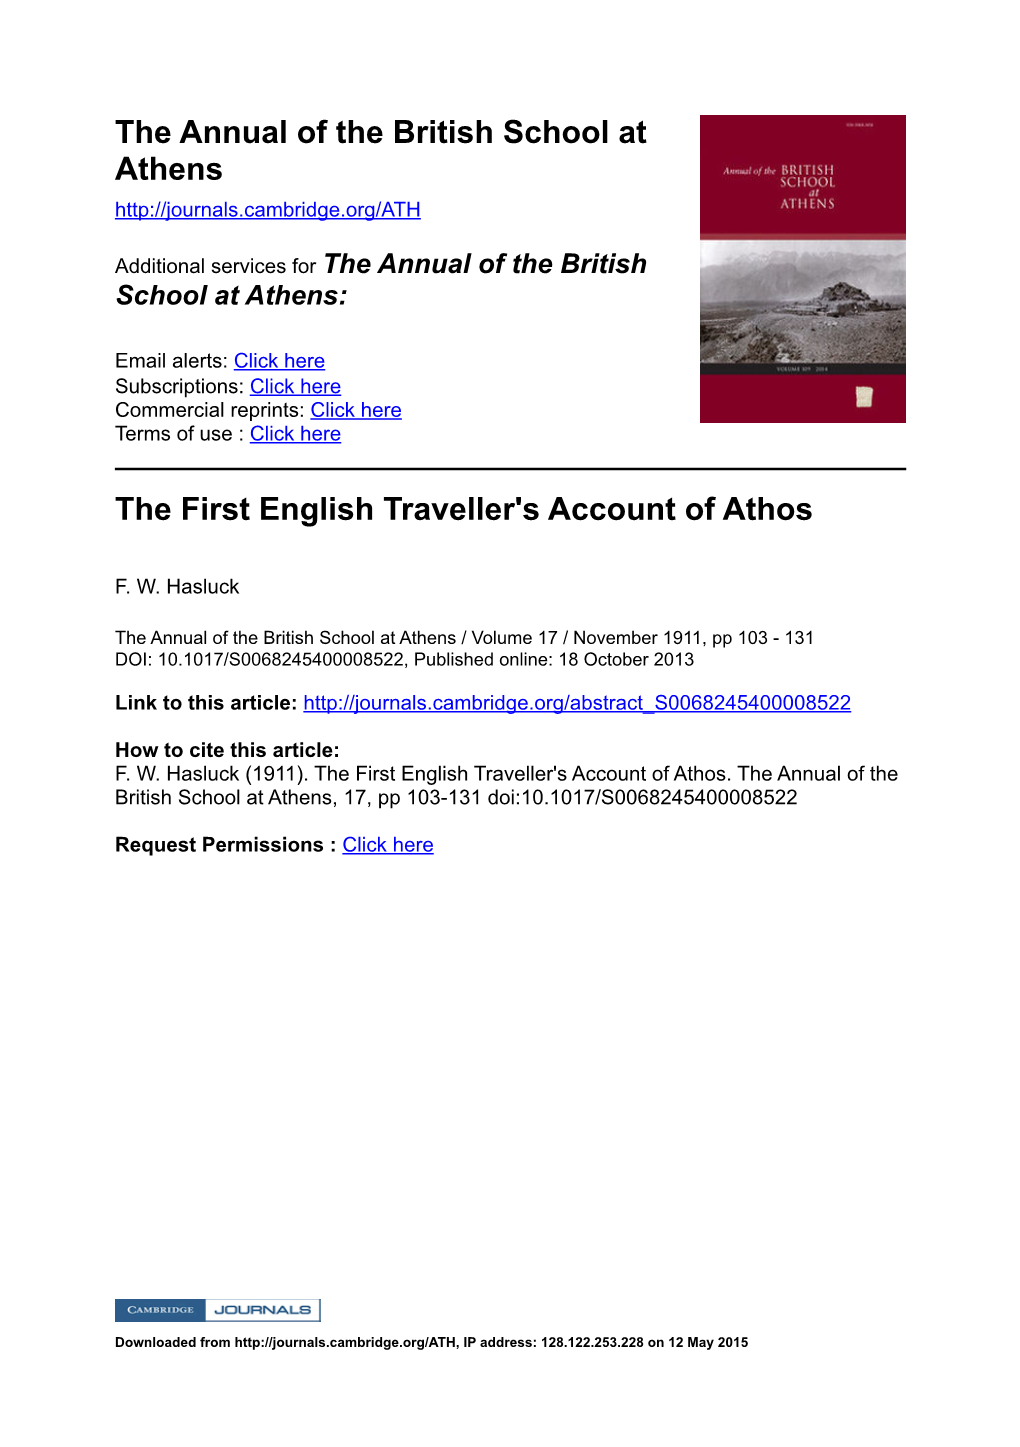 The Annual of the British School at Athens the First English Traveller's Account of Athos